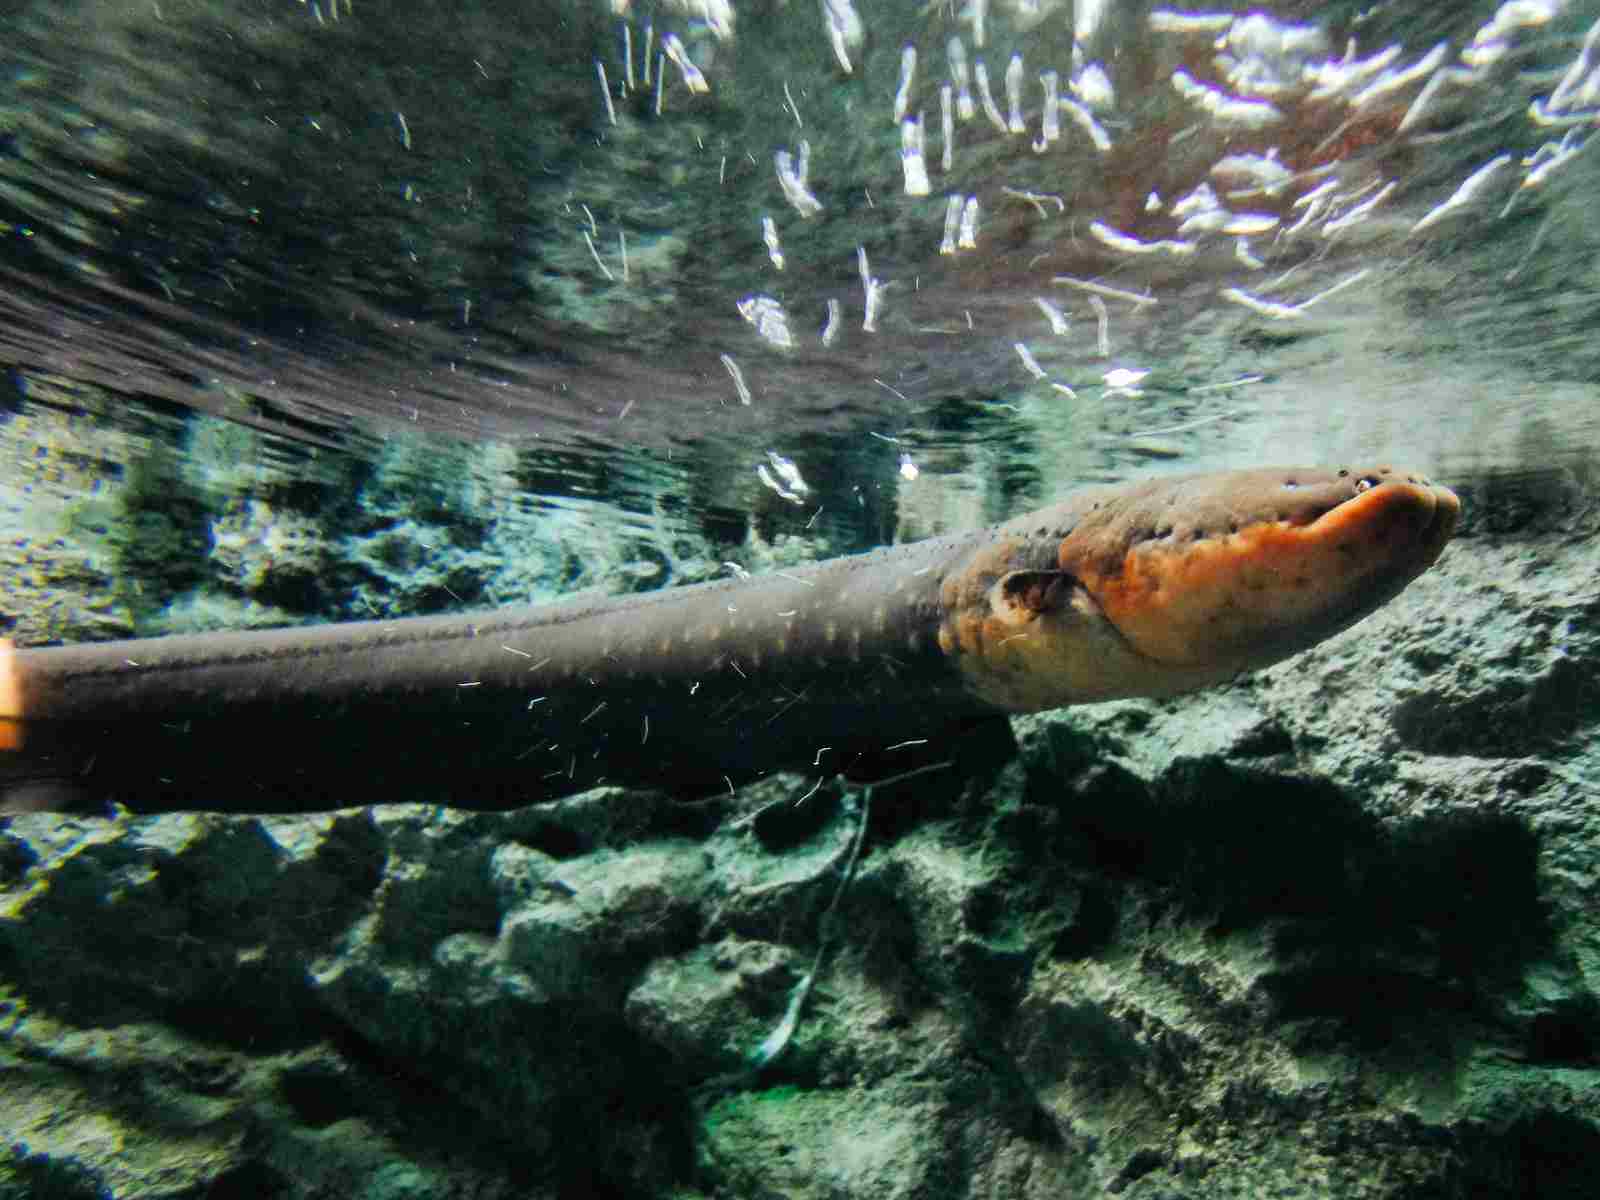 Can You Eat Electric Eels: Potential Risks of Handling Electric Eels Contribute to Their Exclusion as a Food Source (Credit: Dick Thomas Johnson 2012, Uploaded Online 2015 .CC BY 2.0.)